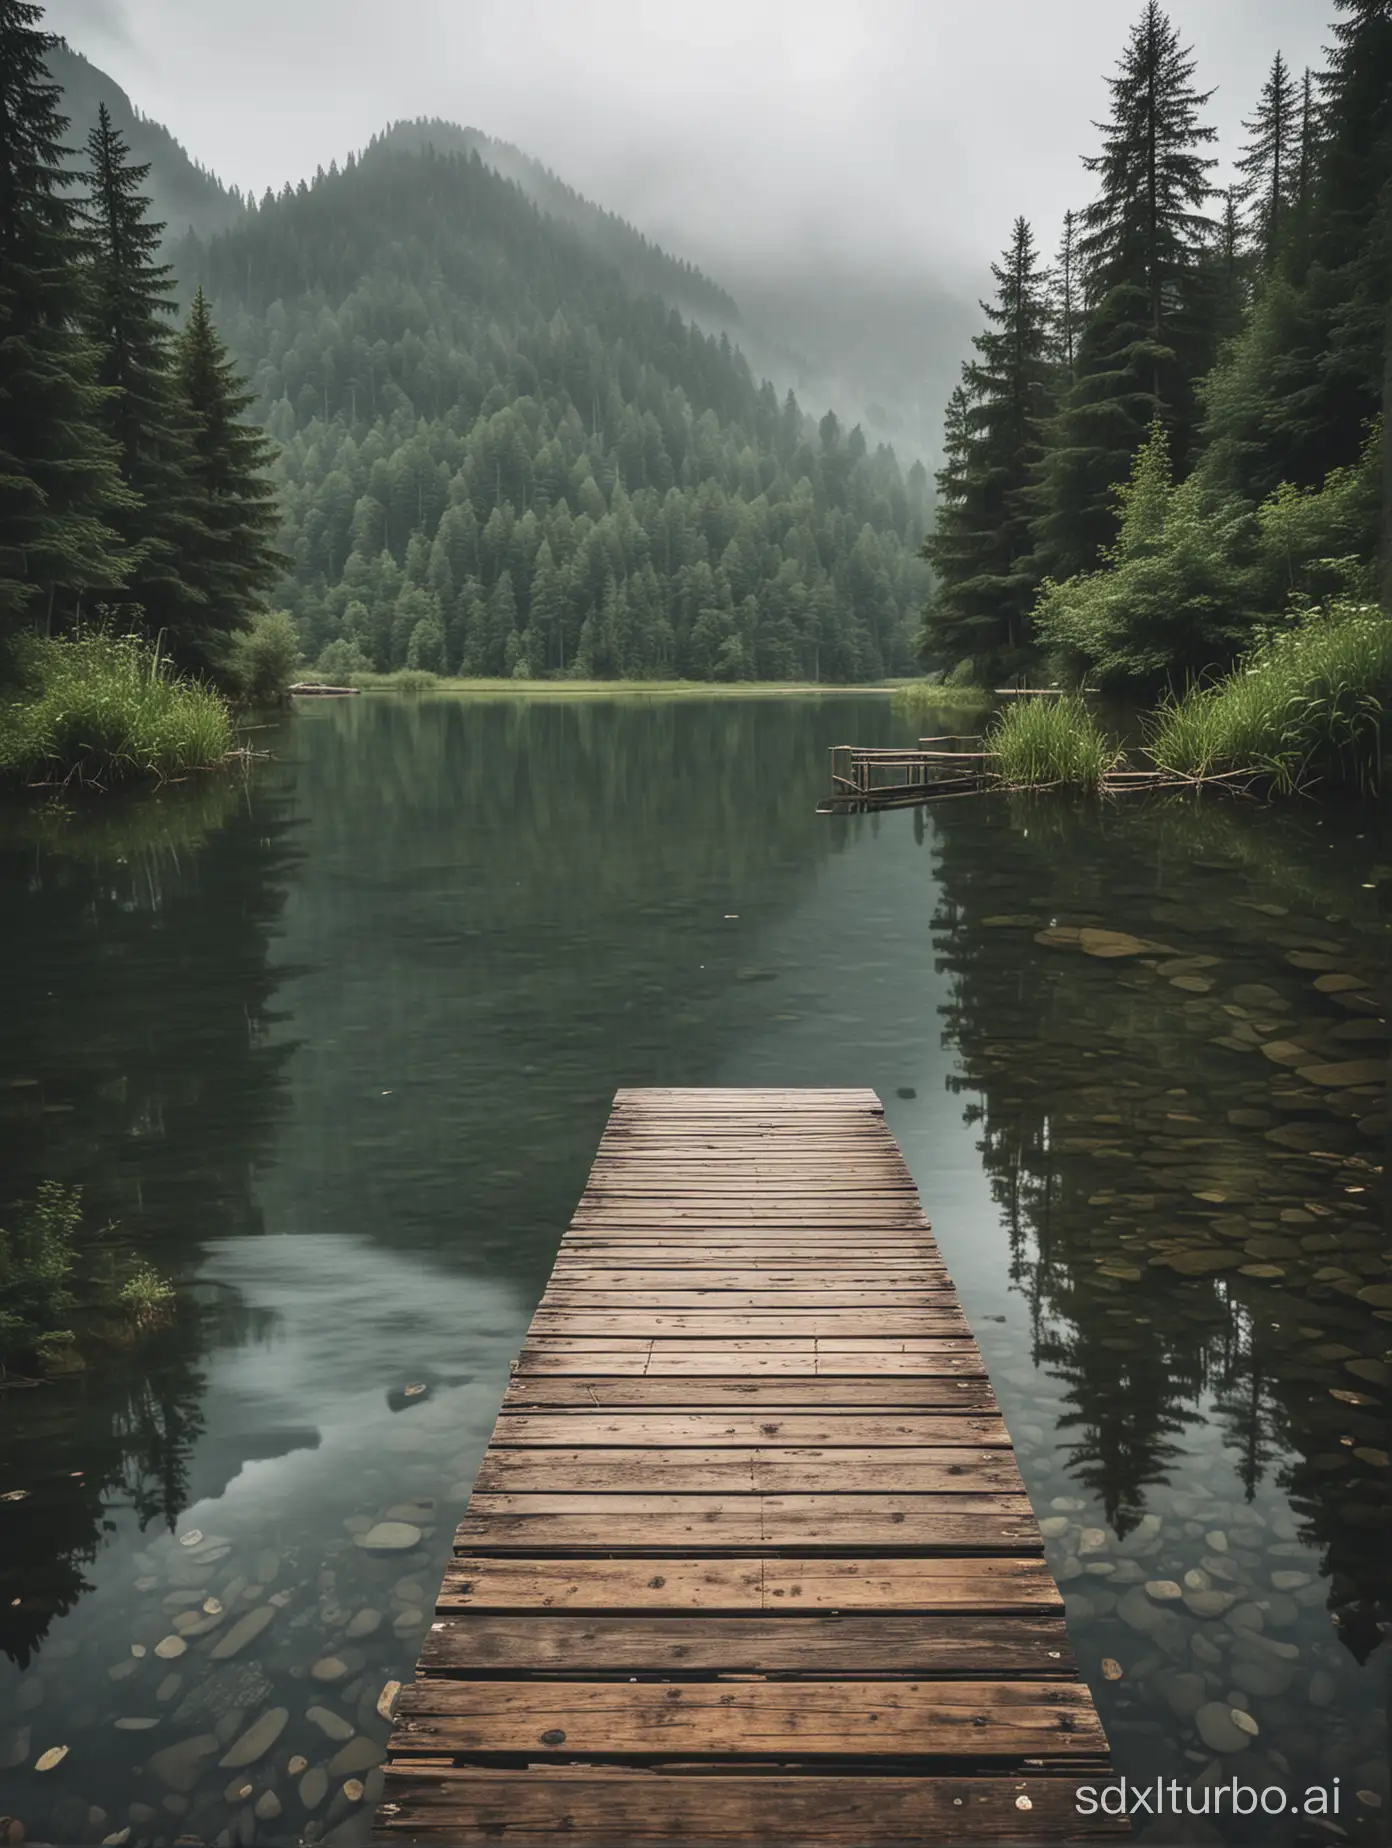 A tranquil lakeside scene, with a wooden dock extending into calm waters. The dock looks very old, indicating it has been exposed to harsh conditions for quite some time. The surroundings are lush, with dense forests and mountains in the background. The sky is gloomy, as rain is imminent.